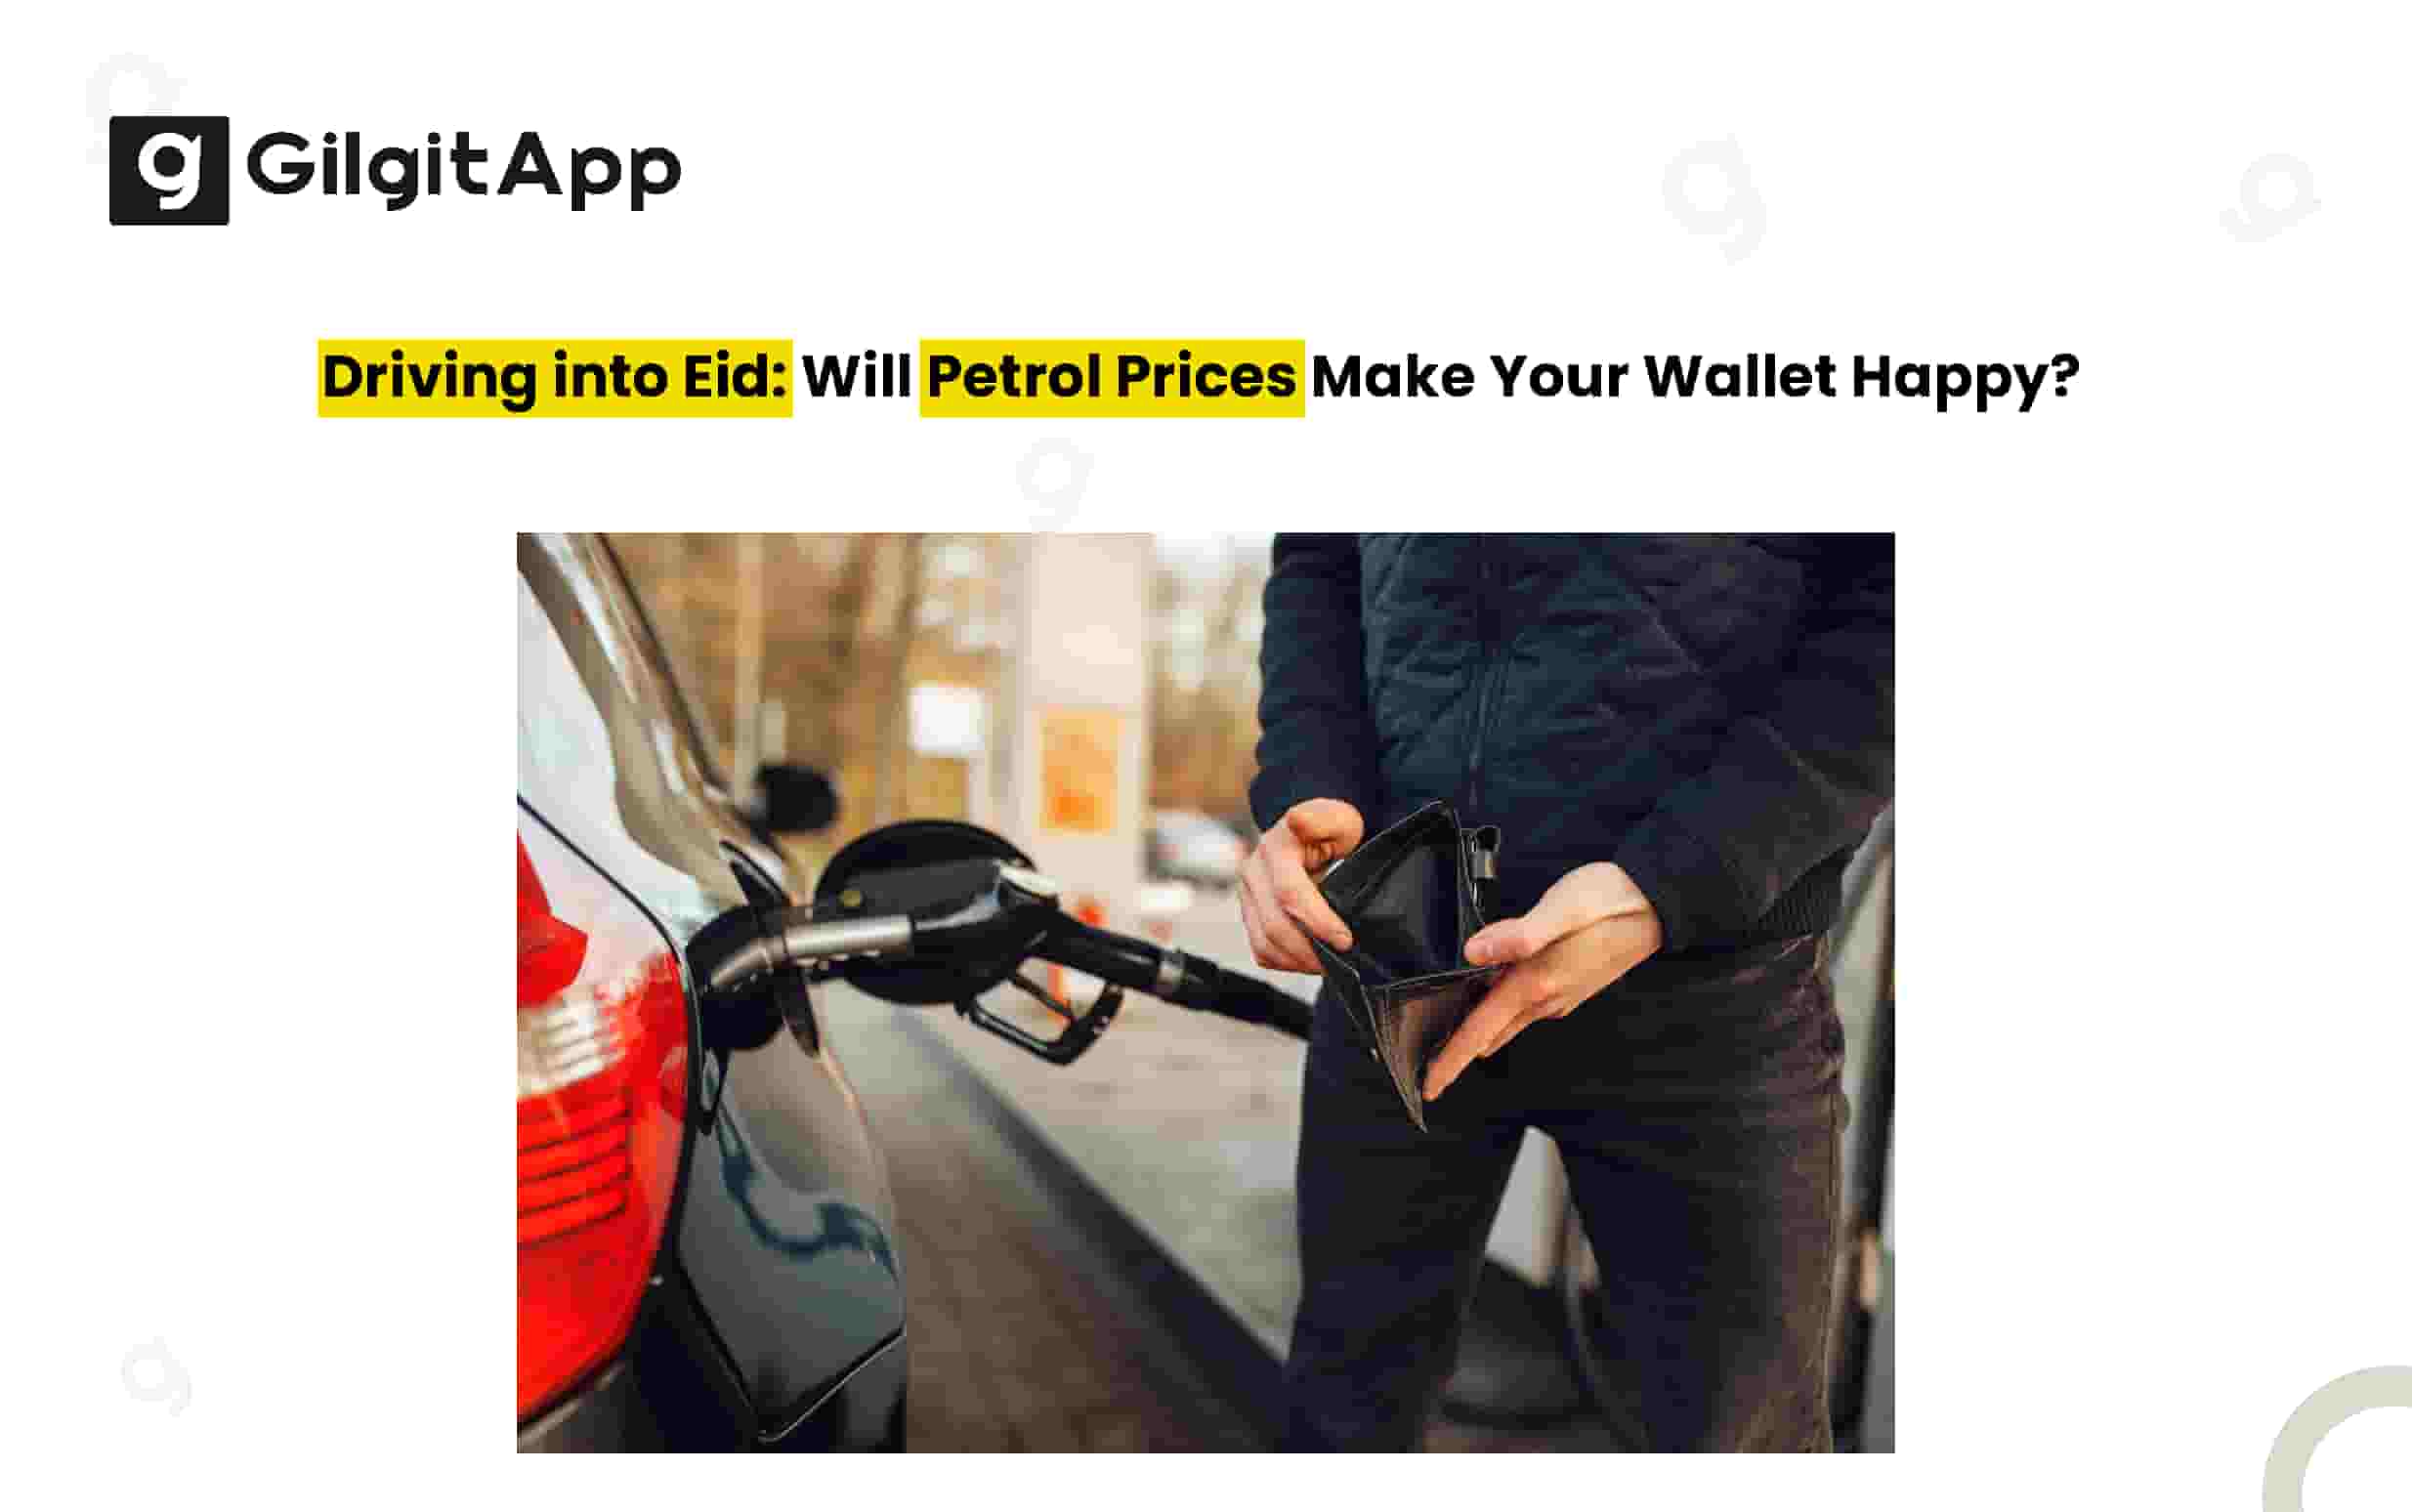 Driving into Eid: Will Petrol Prices Make Your Wallet Happy?